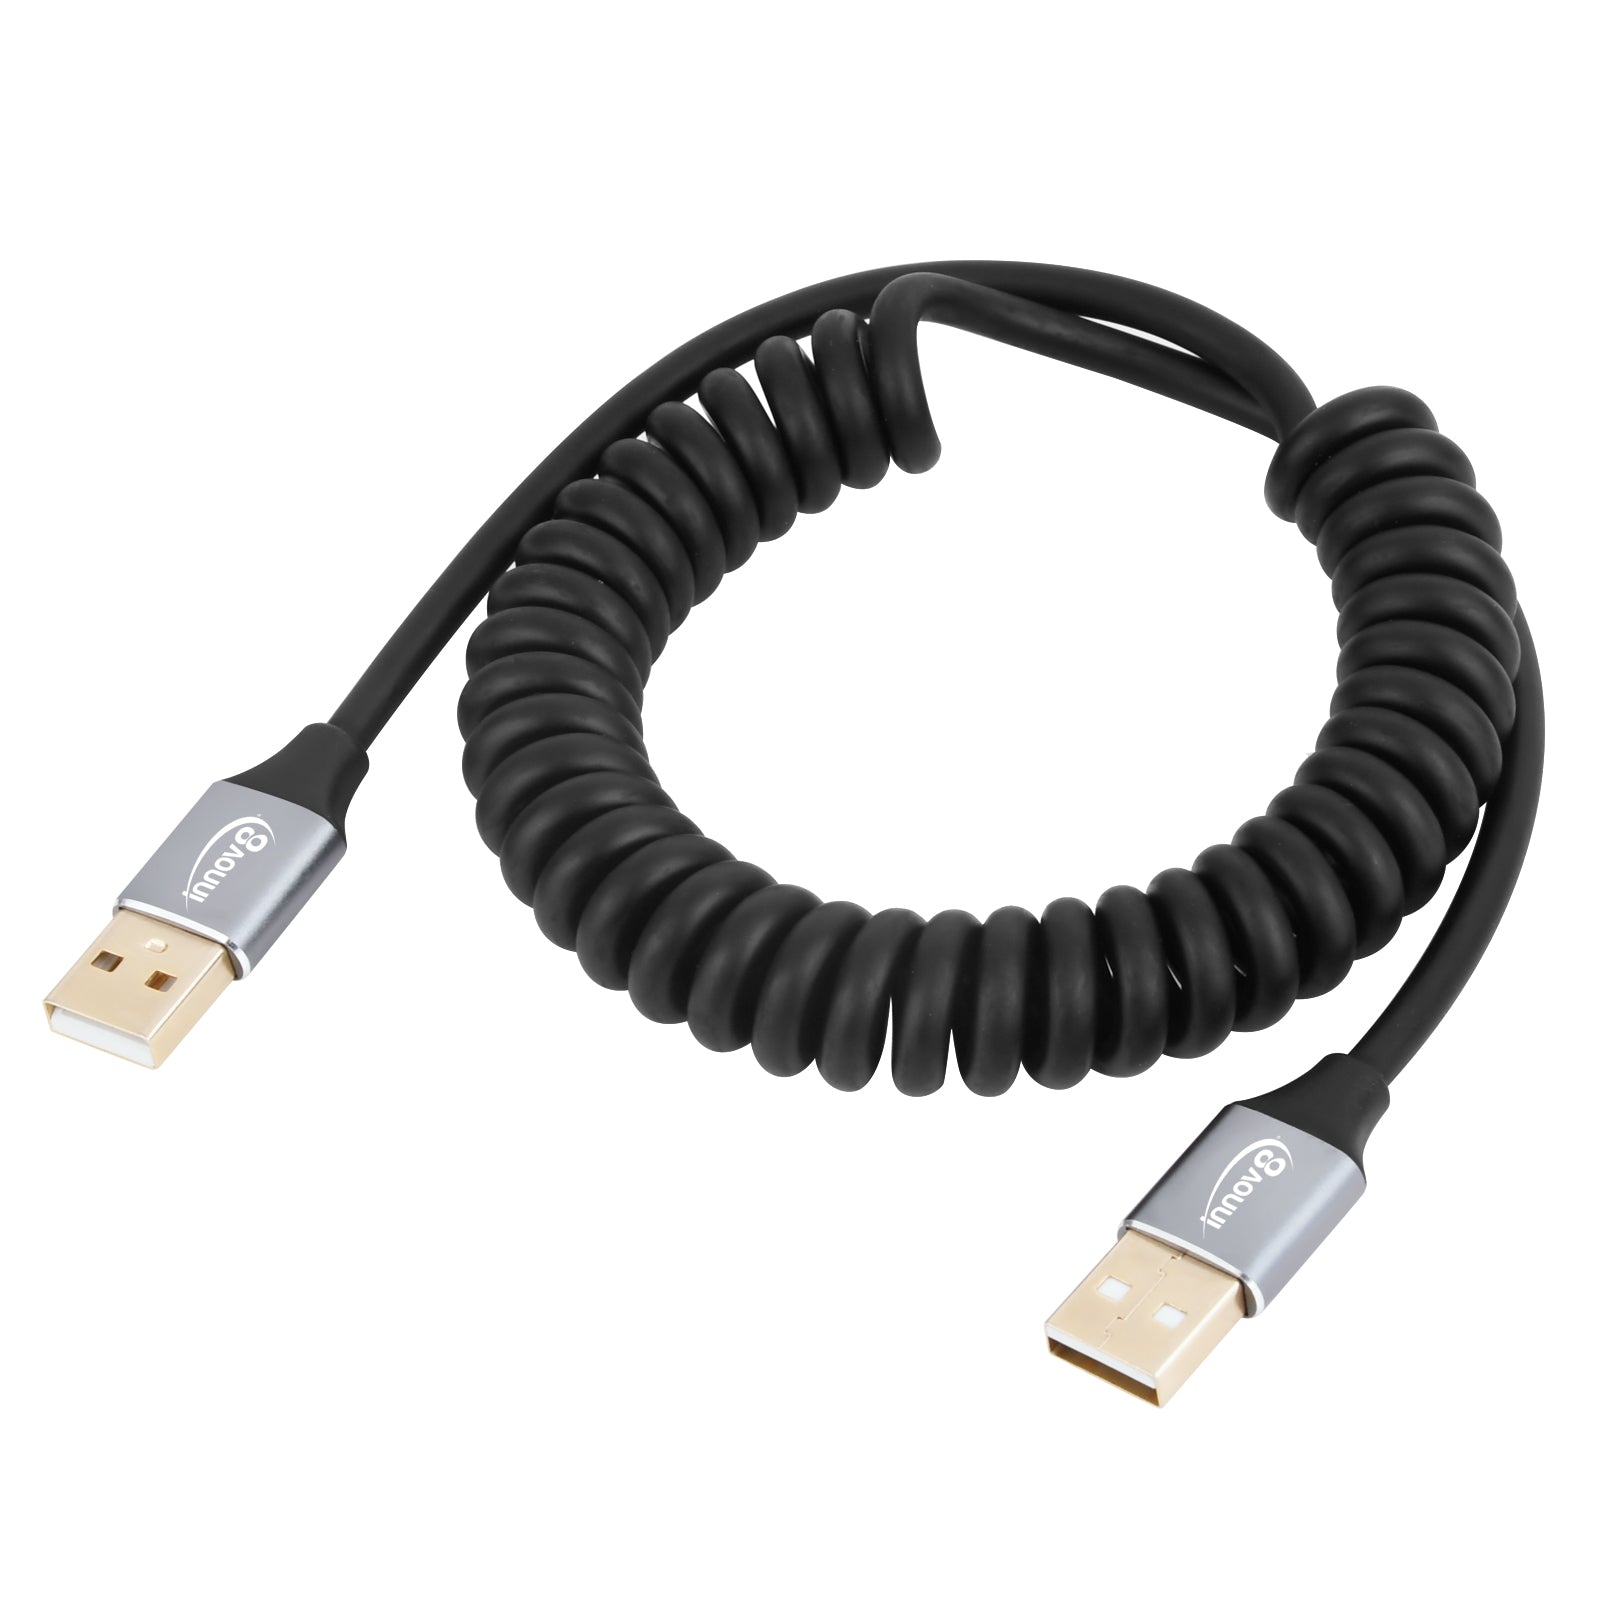 USB 2.0 Type A Male to Male Data Extension Coiled Spring Cable 1.8m